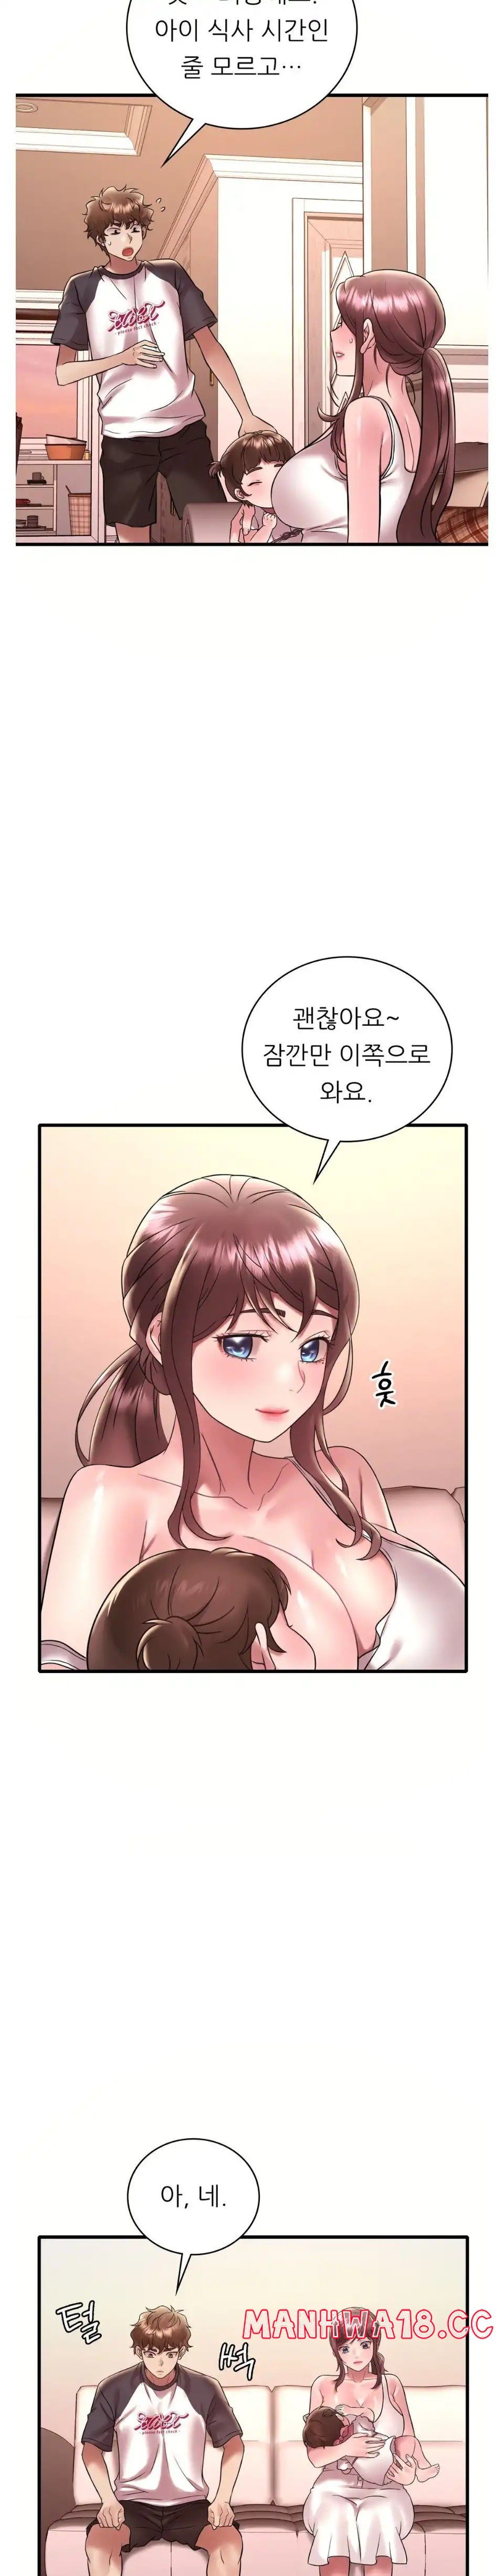 she-wants-to-get-drunk-raw-chap-39-20